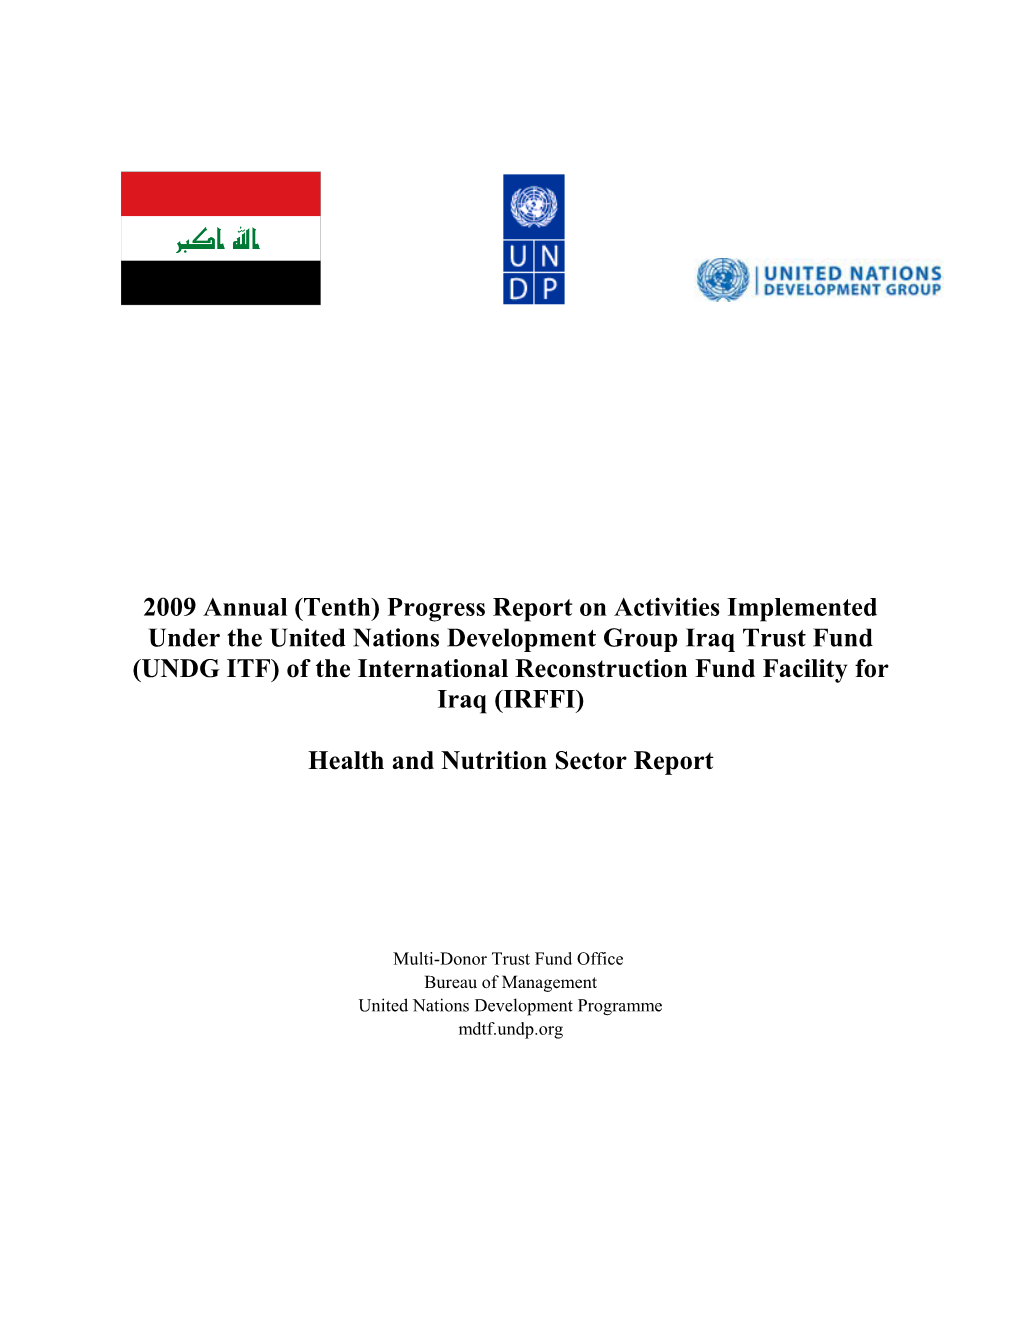 Health and Nutrition Sector Report